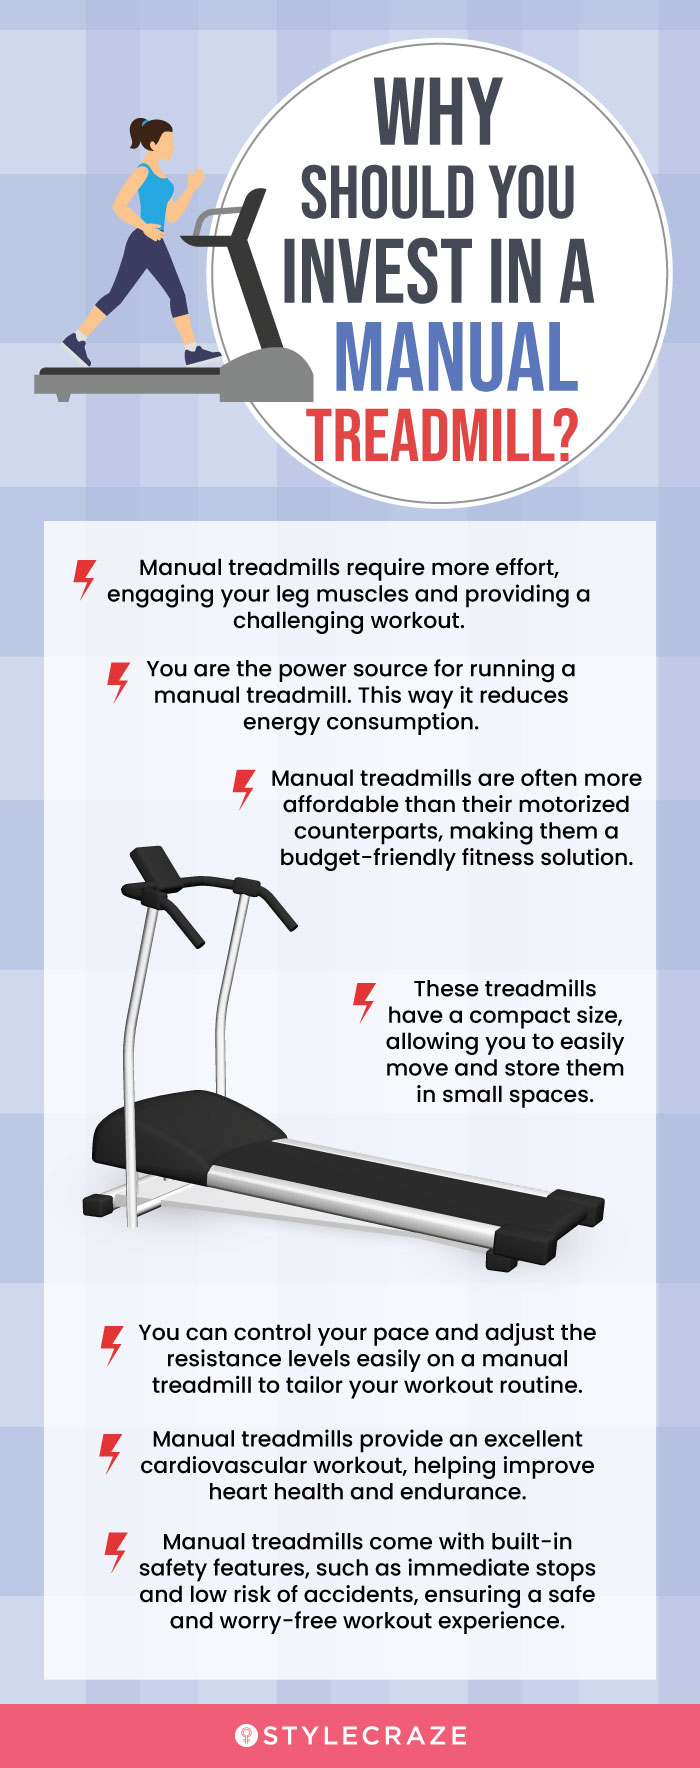 Why Should You Invest In A Manual Treadmill? (infographic)